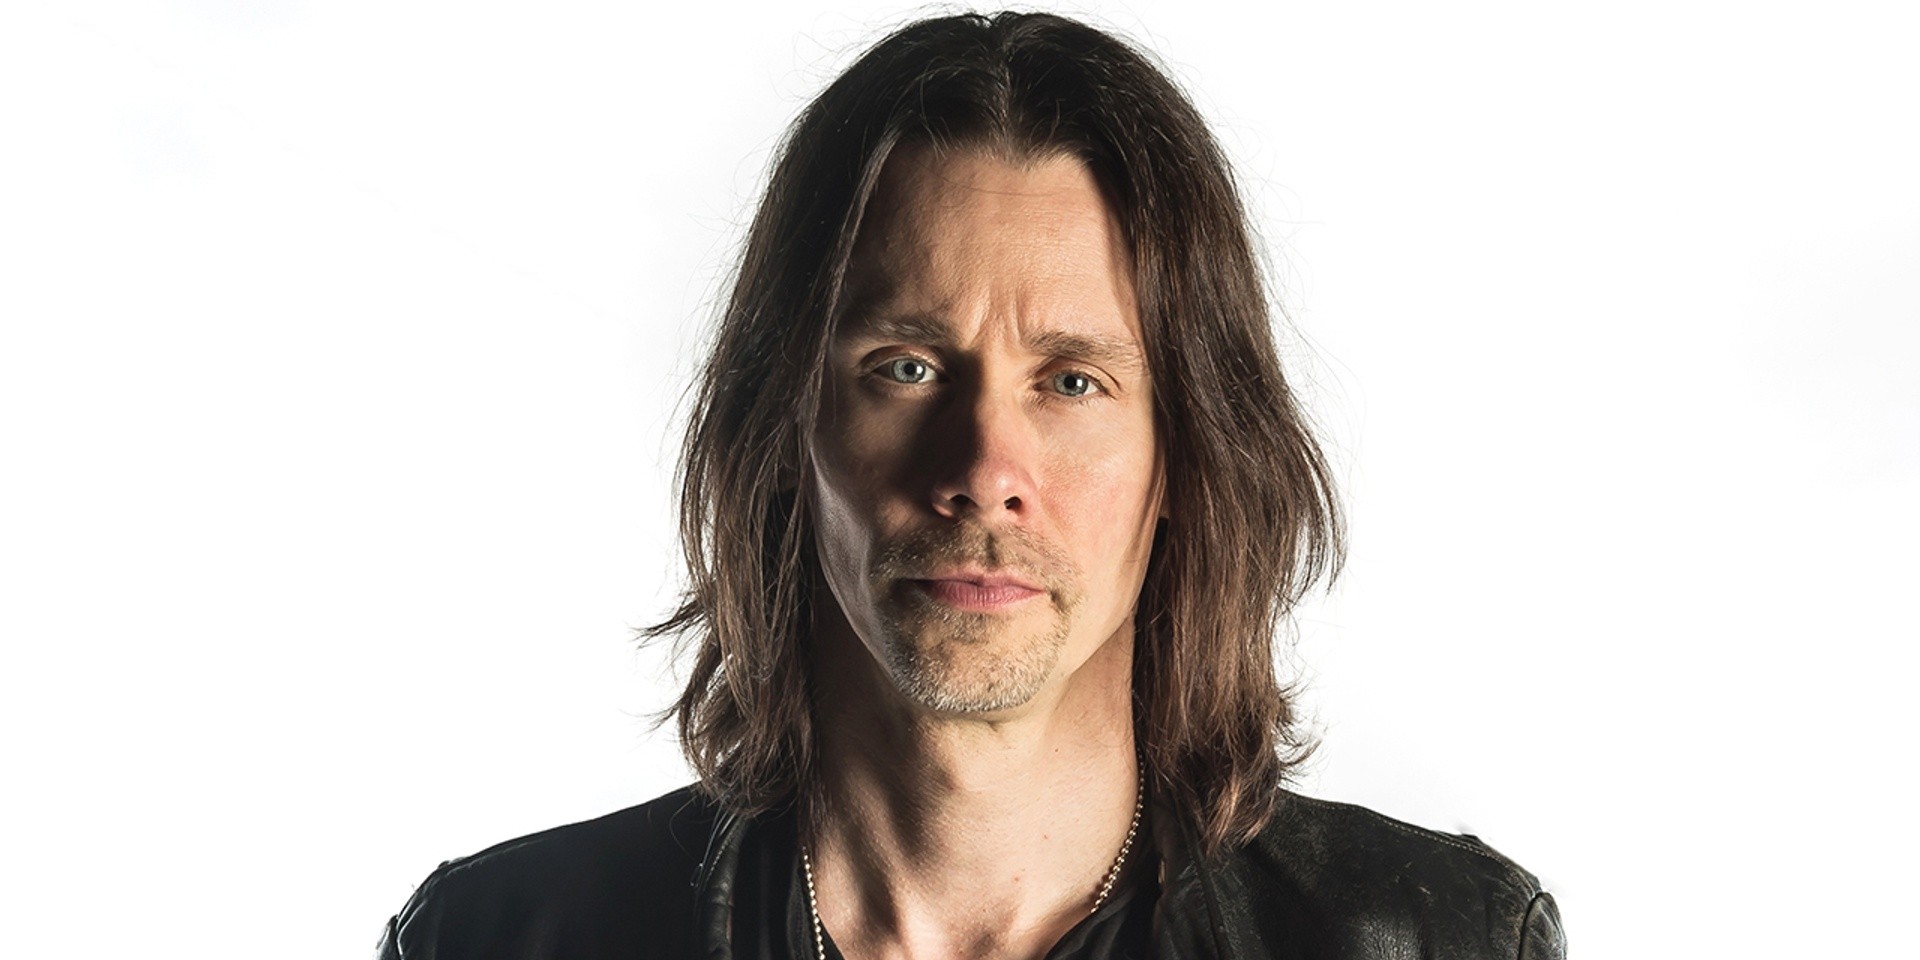 "It’s all about having the opportunity to make people happy through the power of music": An interview with Myles Kennedy